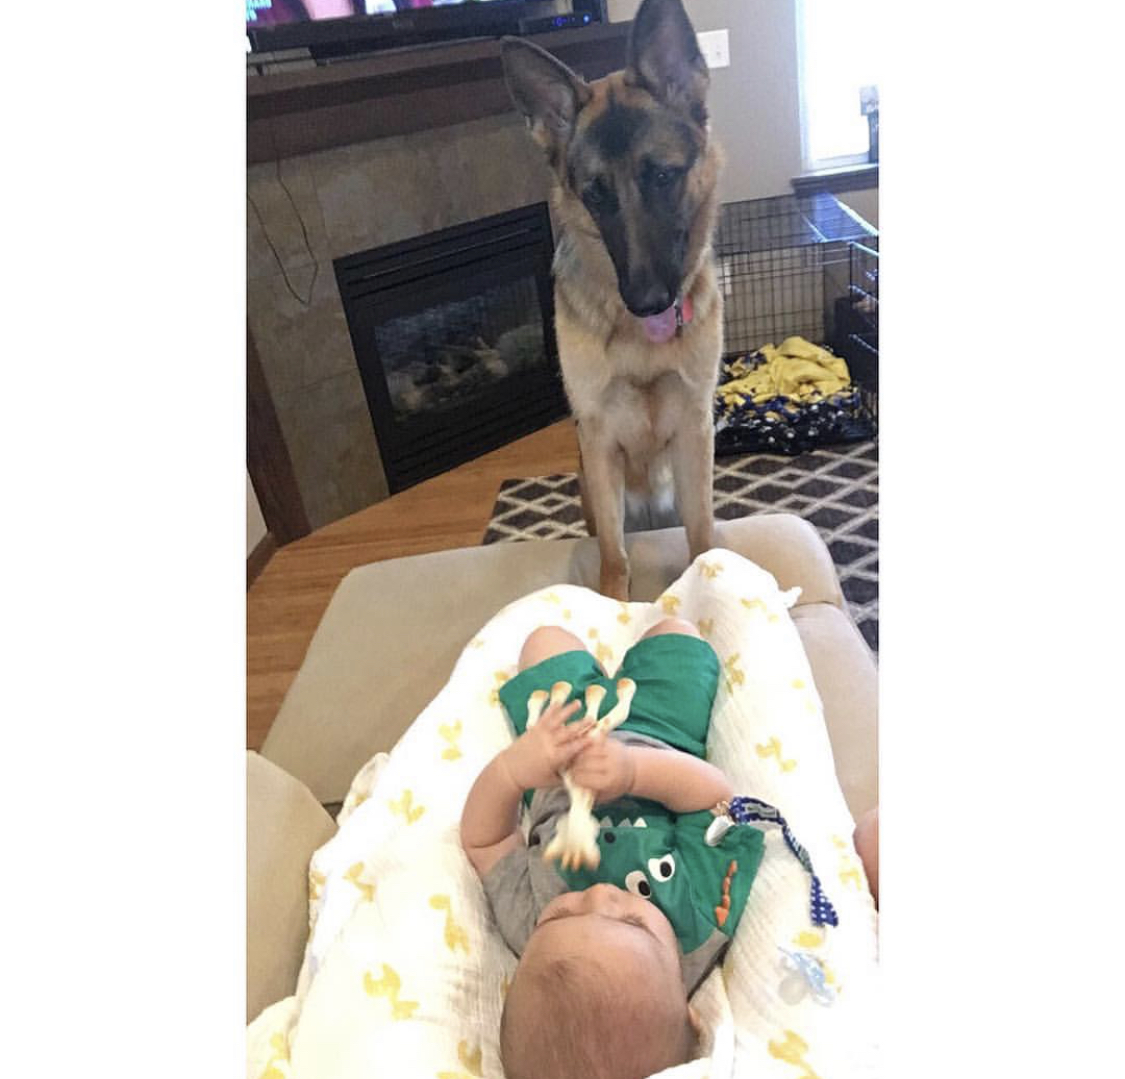 A German Shepherd standing on the floor while staring at the baby in the couch